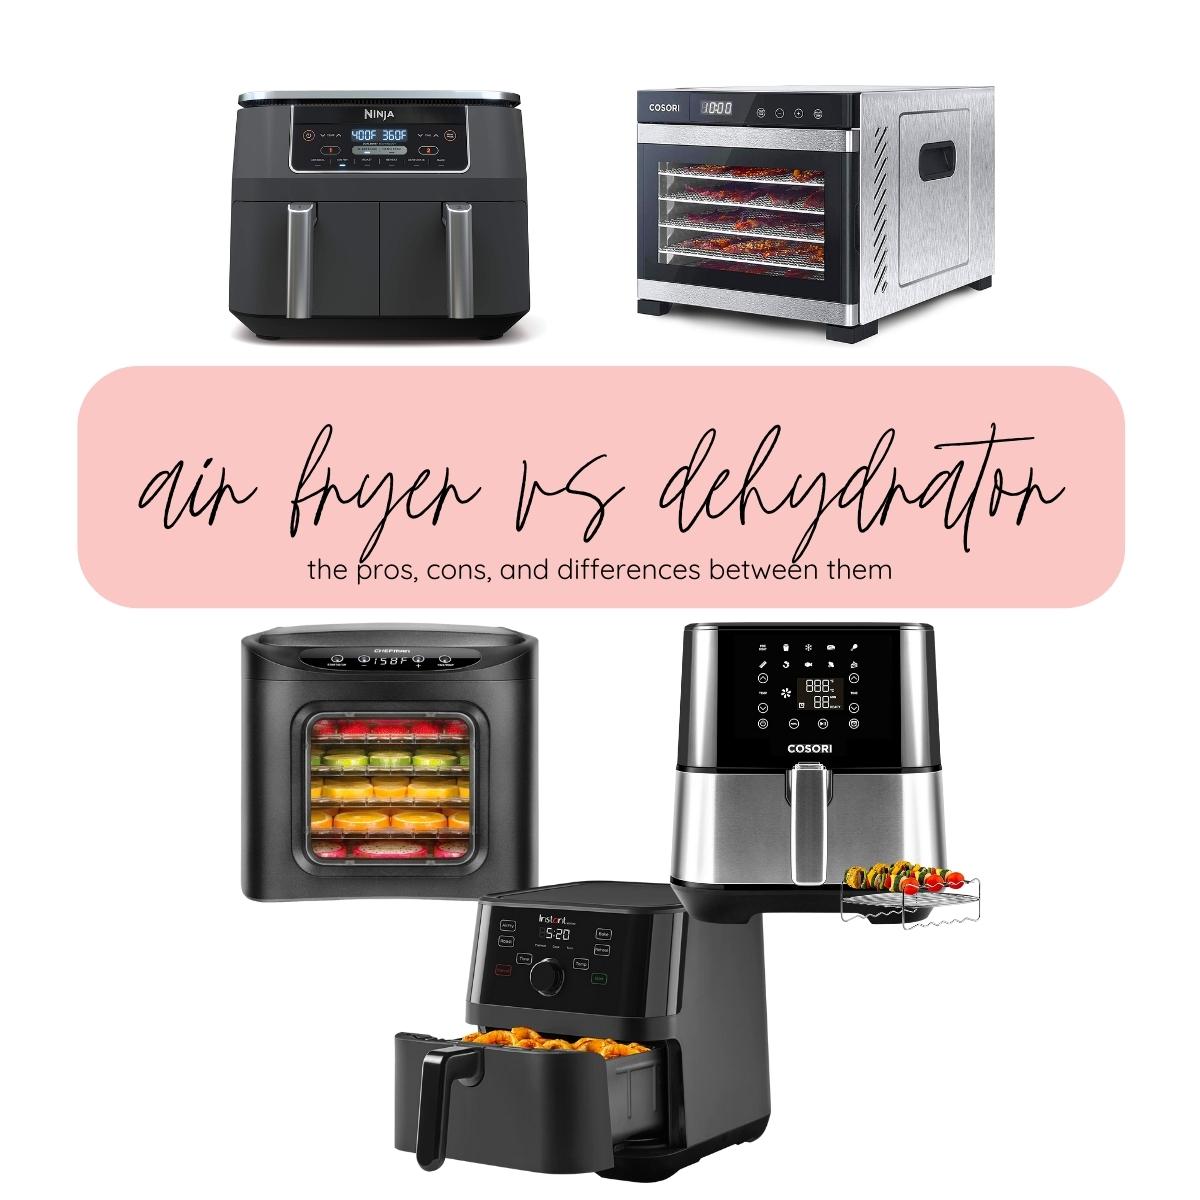 What Dehydrator are you using?